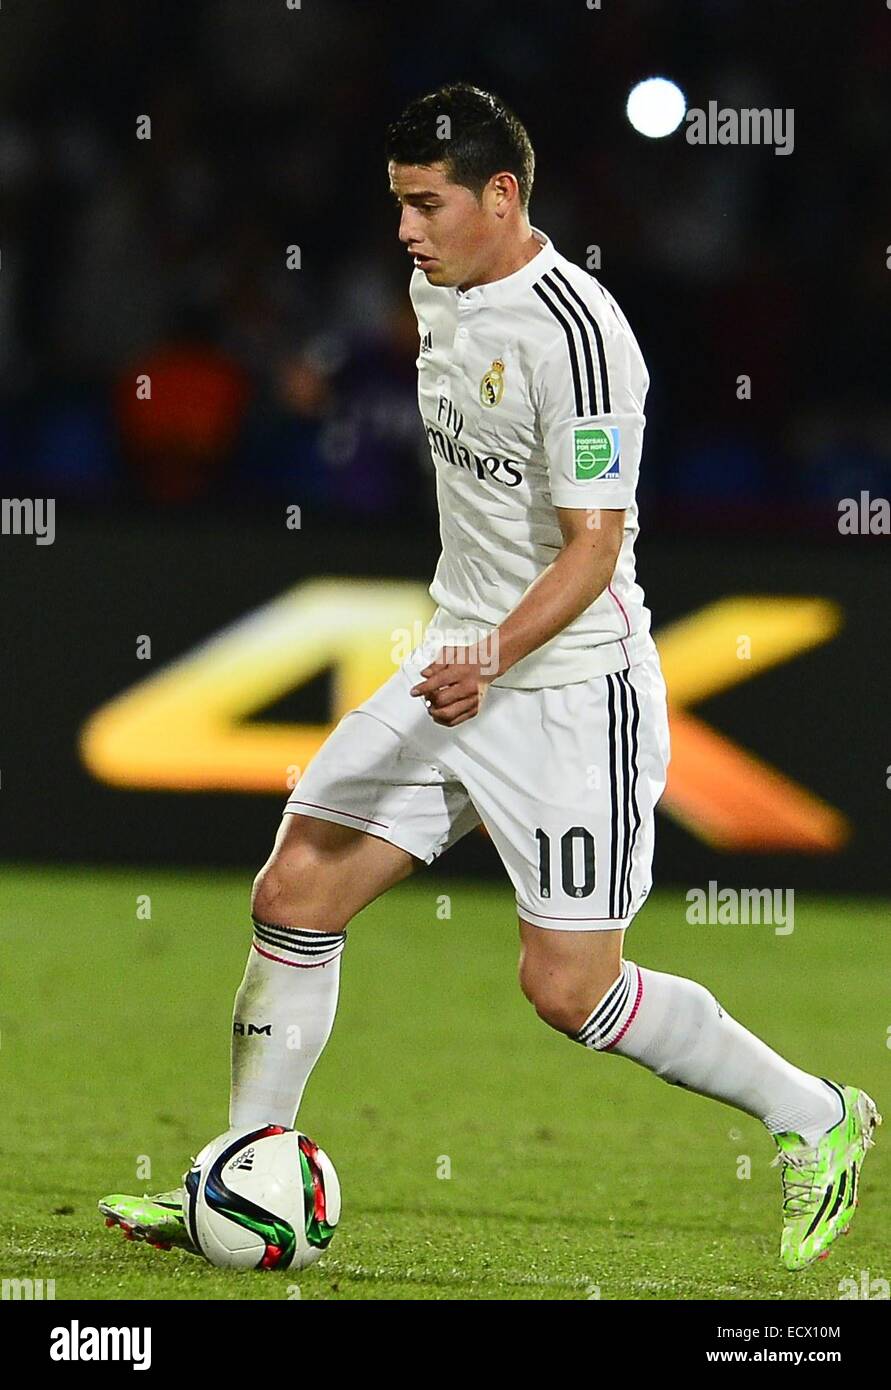 Marrakech, Morocco. 20th Dec, 2014. Real Madrid forward JAMES RODRIGUEZ during the FIFA Club World Cup 2014 in Marrakech. Credit:  Marcio Machado/ZUMA Wire/Alamy Live News Stock Photo